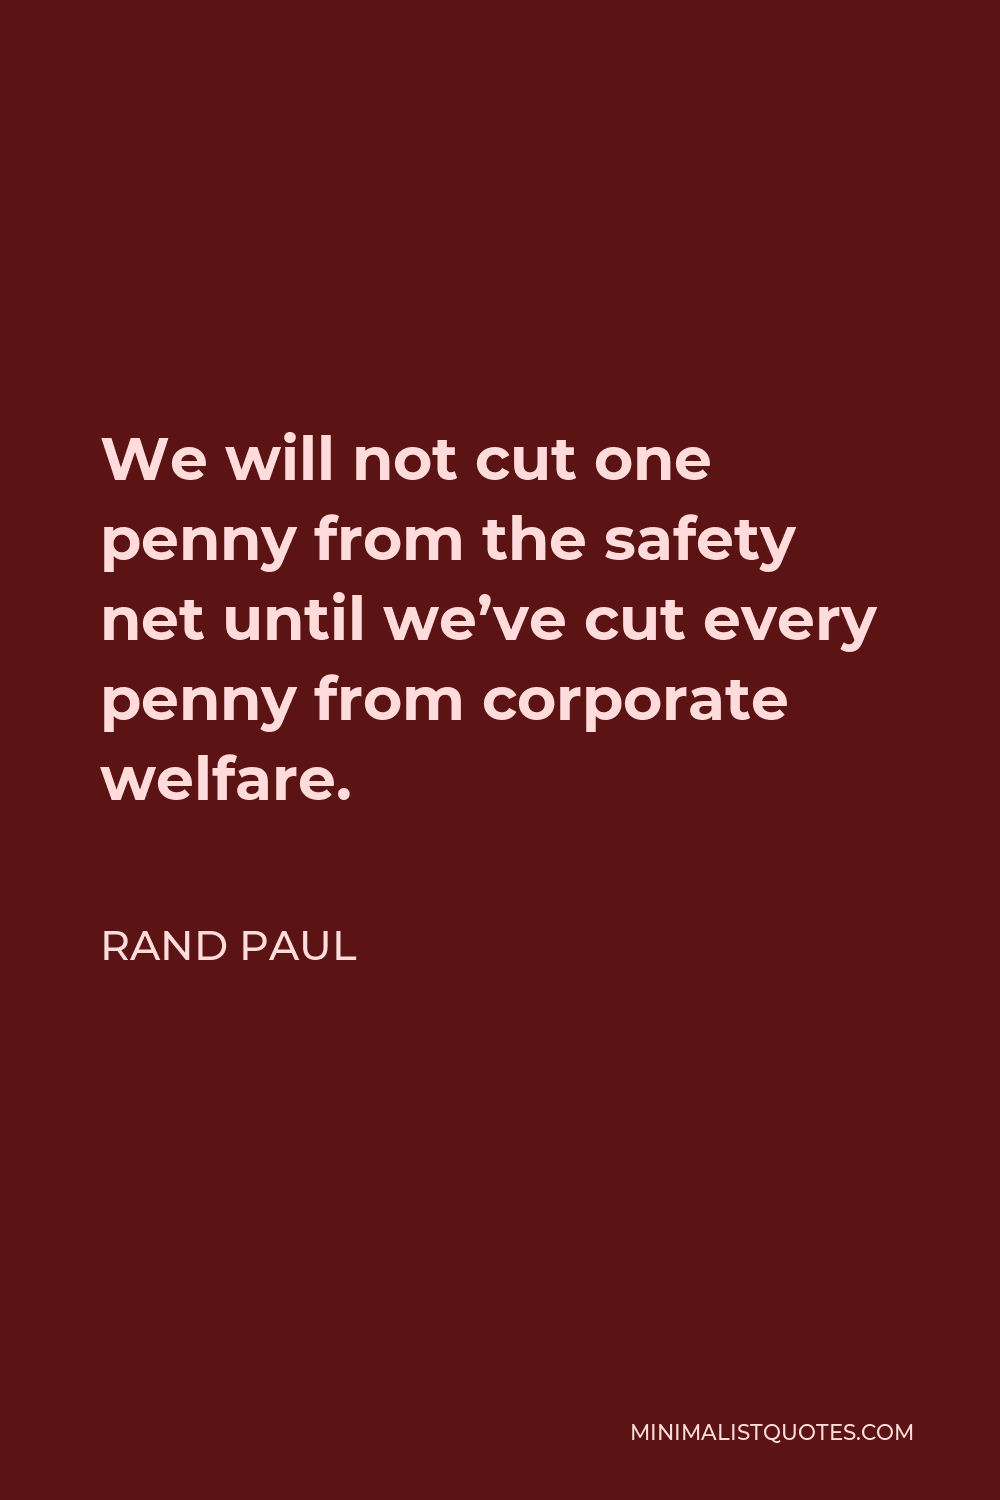 Rand Paul Quote - We will not cut one penny from the safety net until we’ve cut every penny from corporate welfare.